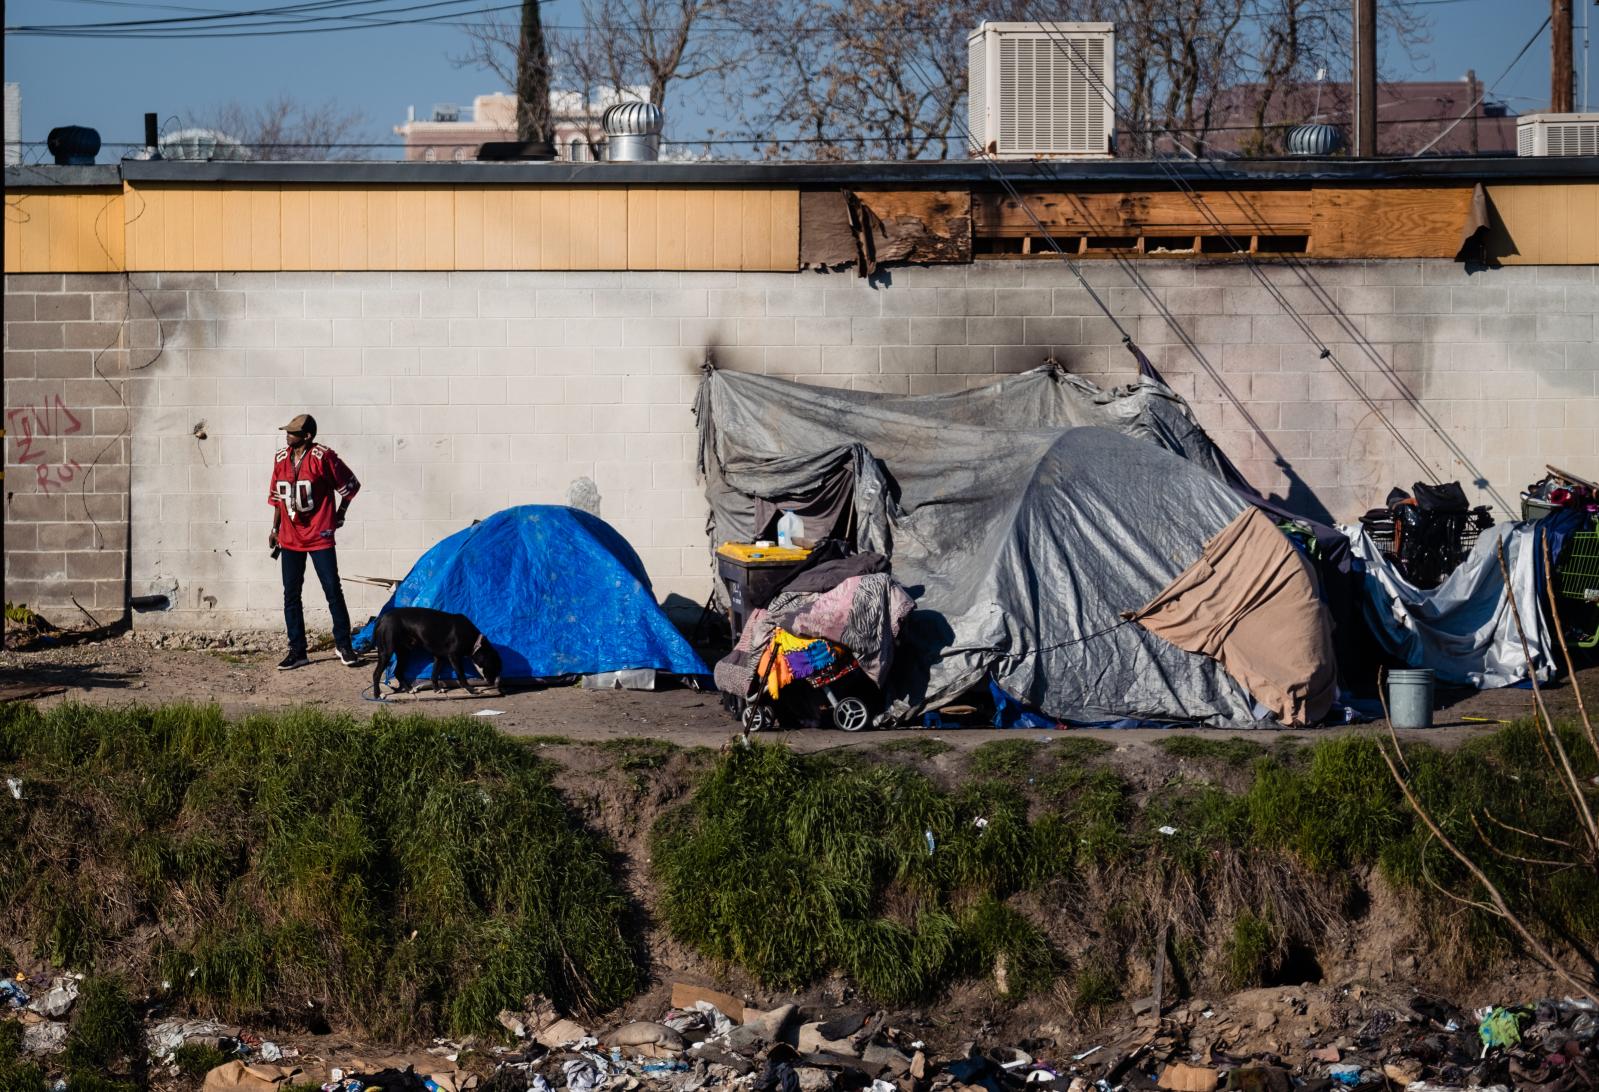 Image from Universal Basic Income: Trying to save a city - STOCKTON, CALIFORNIA-FEBRUARY 7: A homeless encampment is...